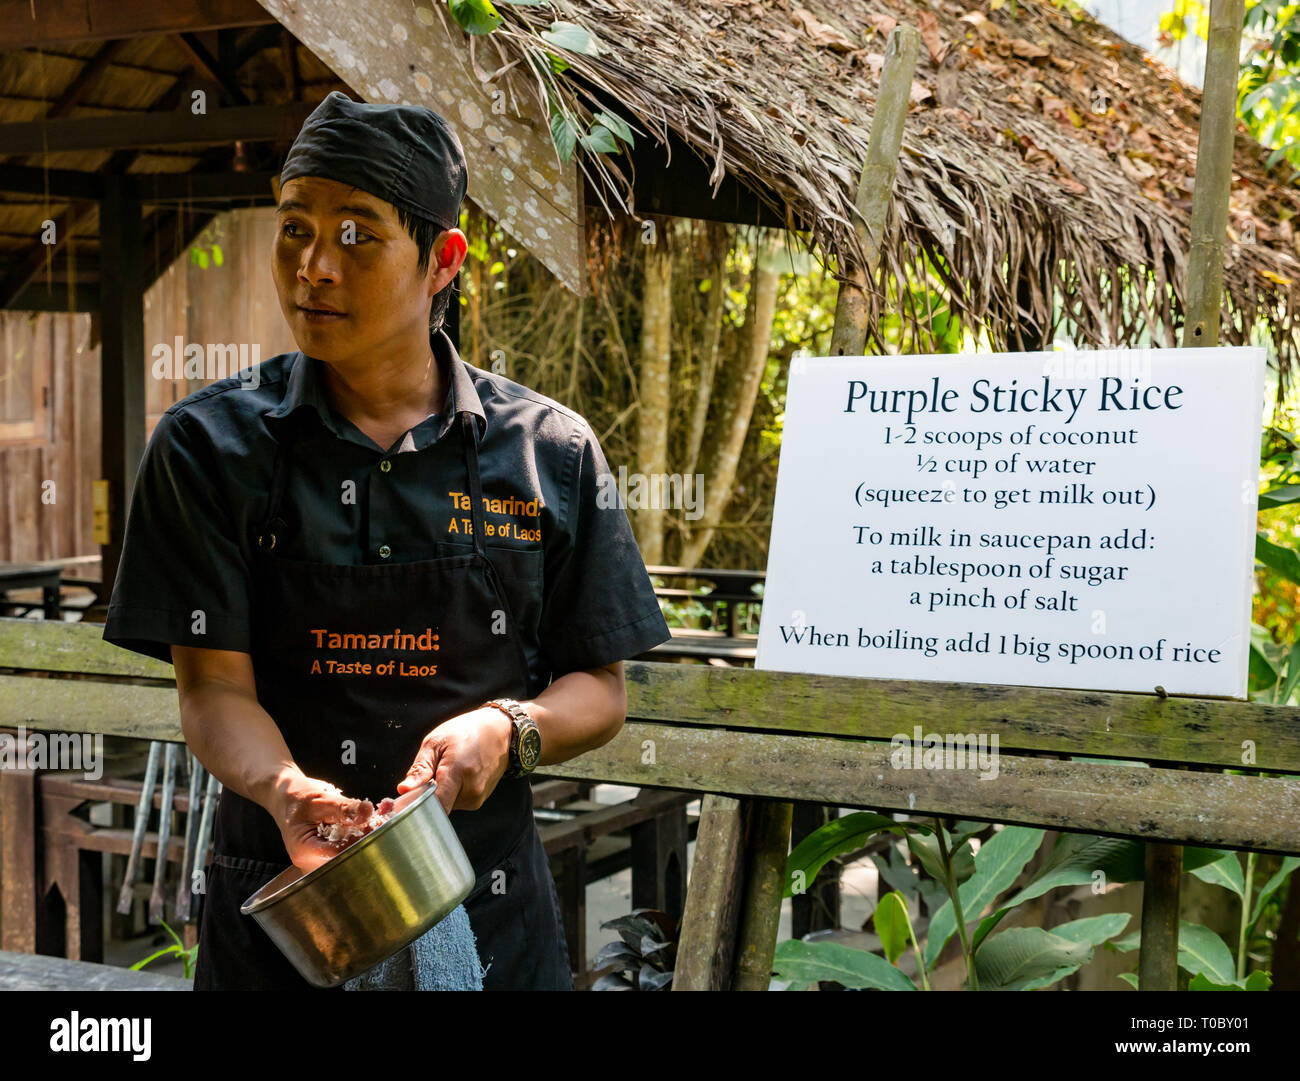 Lao cooking lesson with instruction from Lao chef and recipe for purple sticky rice, Tamarind cookery school, Luang Prabang, Laos Stock Photo